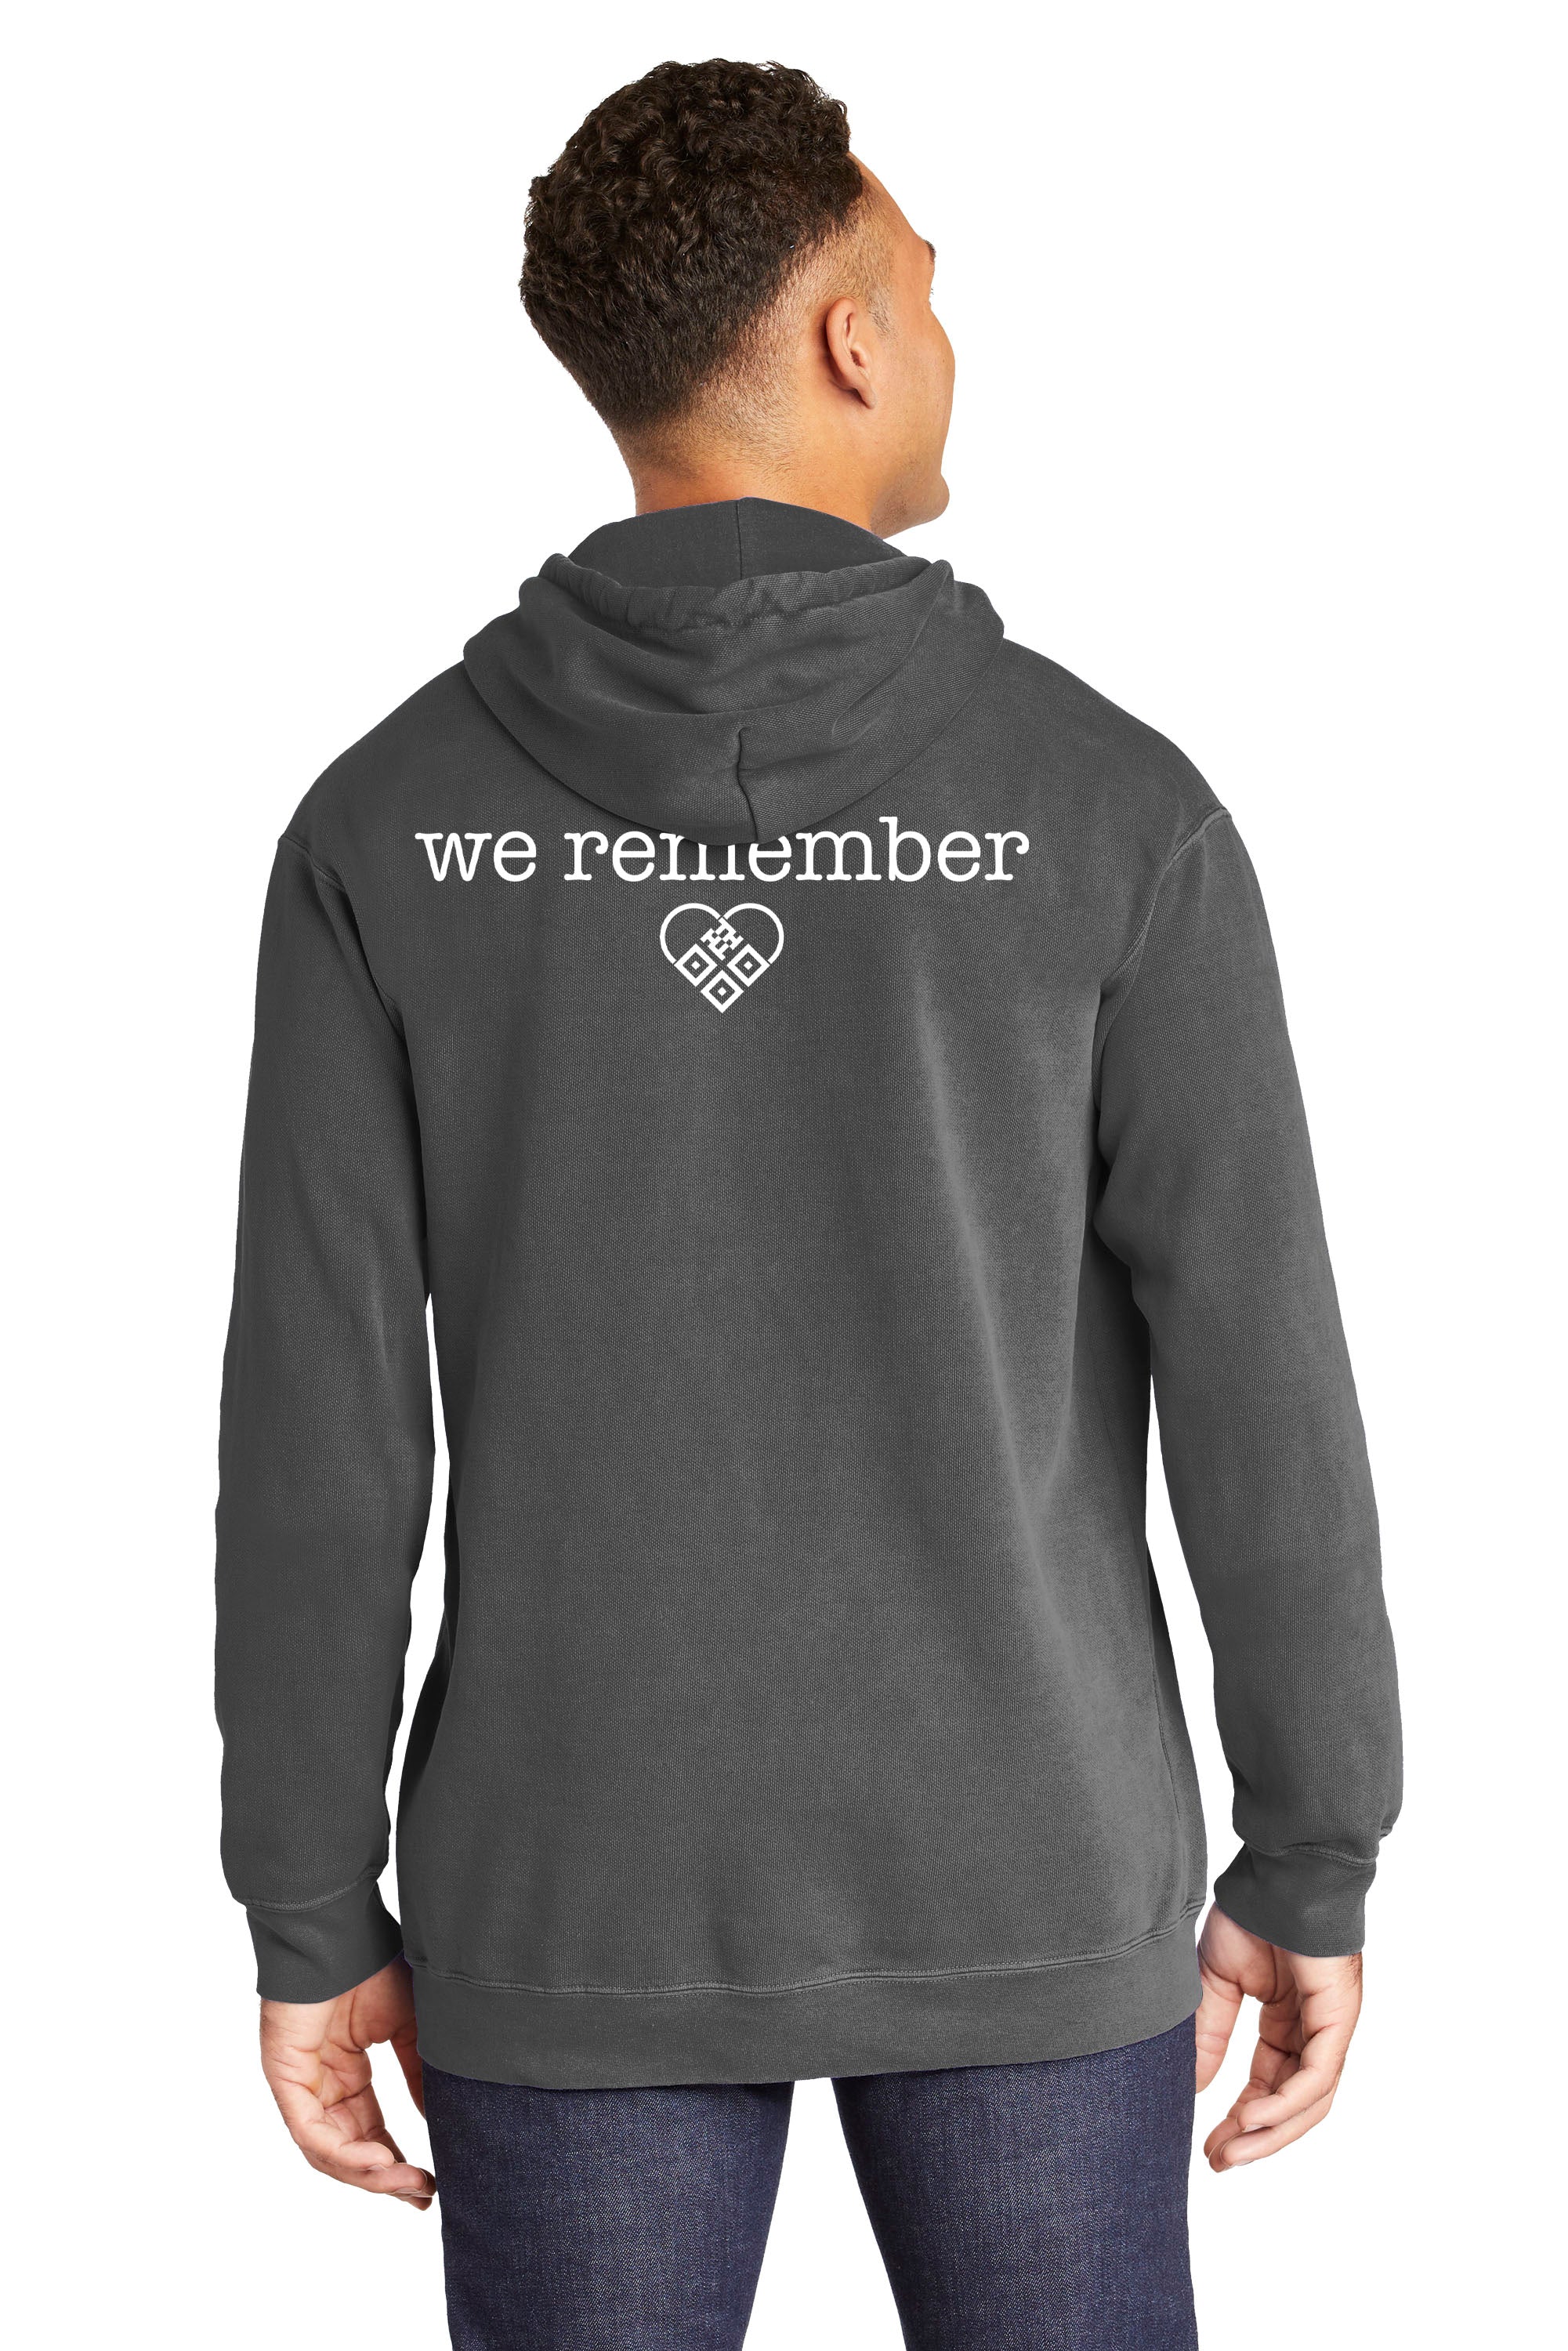 Turning Hearts -"We Remember"- Pullover Hoodie